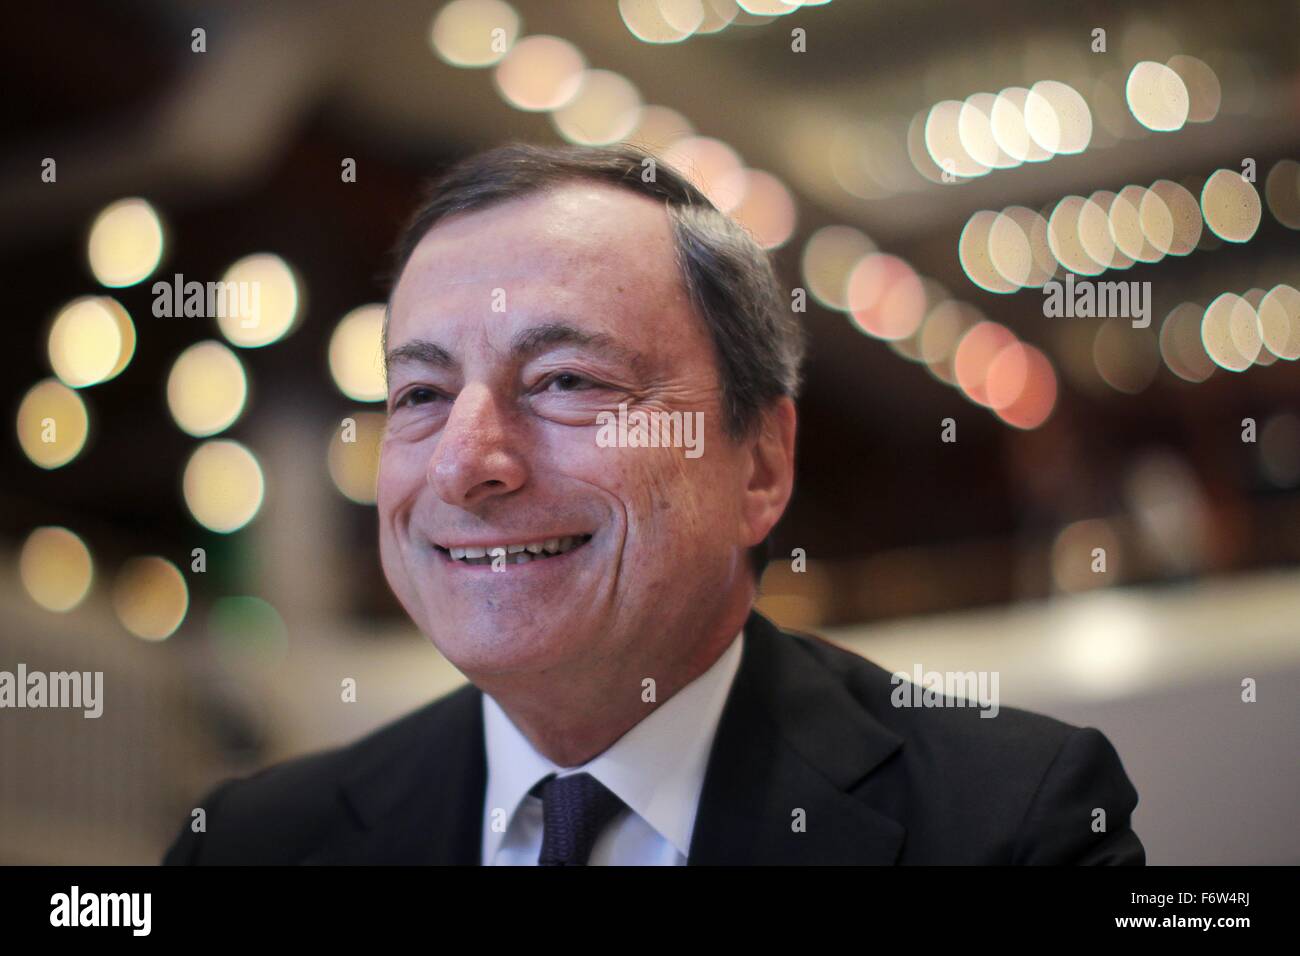 Frankfurt, Germany. 20th November, 2015. President of the European Central Bank (ECB), Mario Draghi, attends the European Banking Congress (EBC) in Frankfurt/Main, Germany, 20 November 2015. The congress focusses on various aspects of global and national finance and economic policies. Photo: Fredrik von Erichsen/dpa Credit:  dpa picture alliance/Alamy Live News Stock Photo